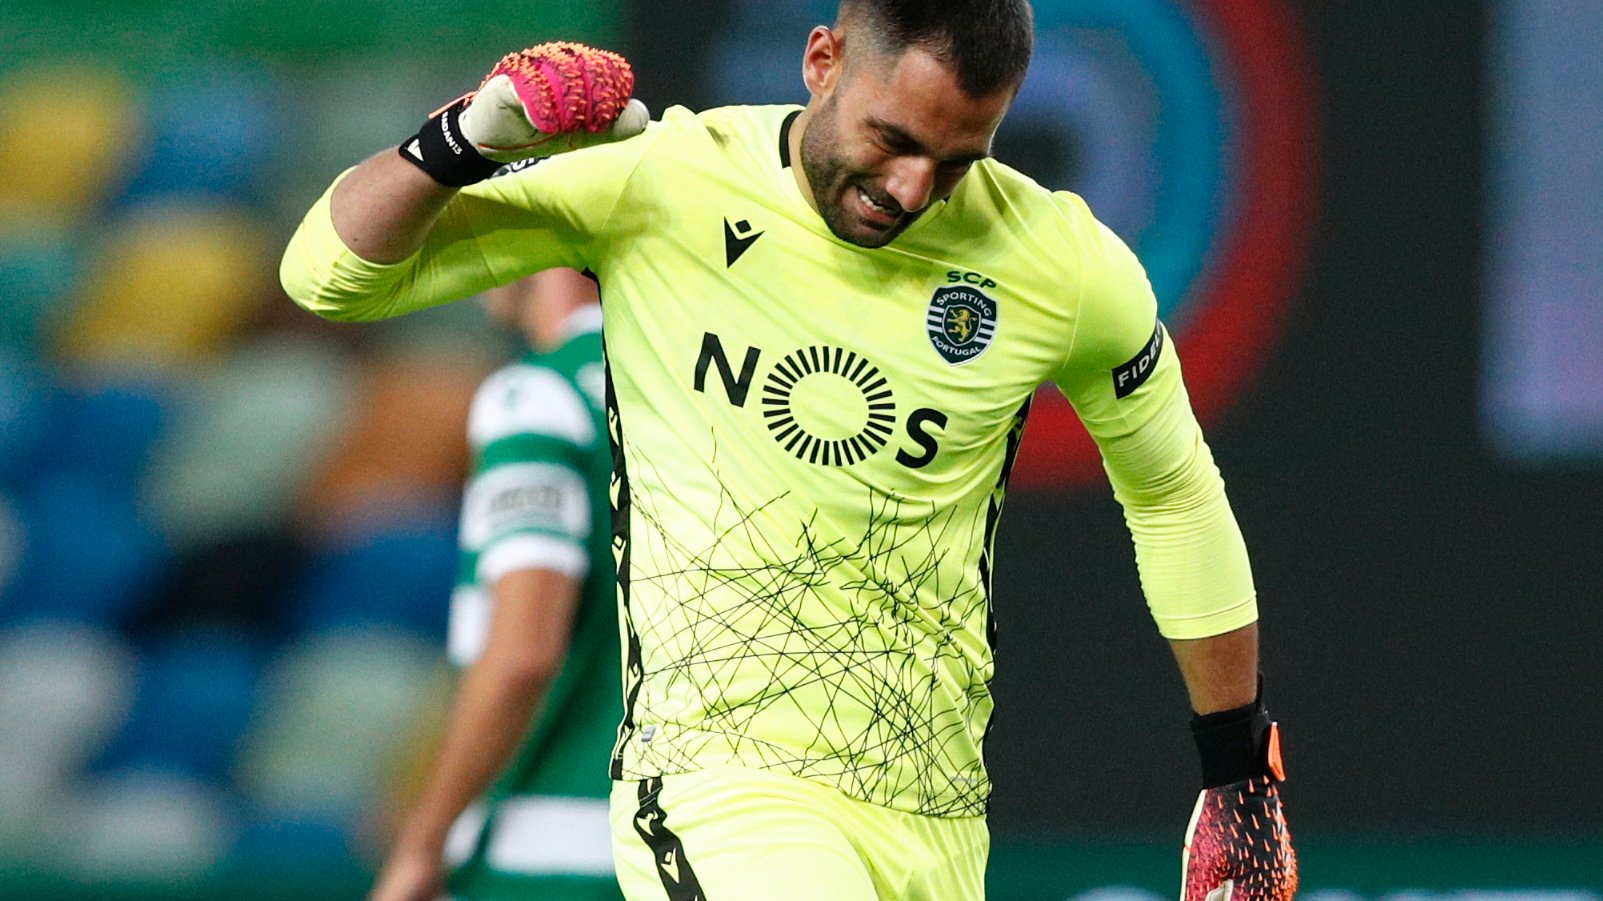 epa09151509 Sporting goalkeeper Antonio Adan reacts after conceding a goal to Belenenses SAD during their Portuguese First League soccer match held at Alvalade Stadium in Lisbon, Portugal, 21 April 2021.  EPA/ANTONIO COTRIM